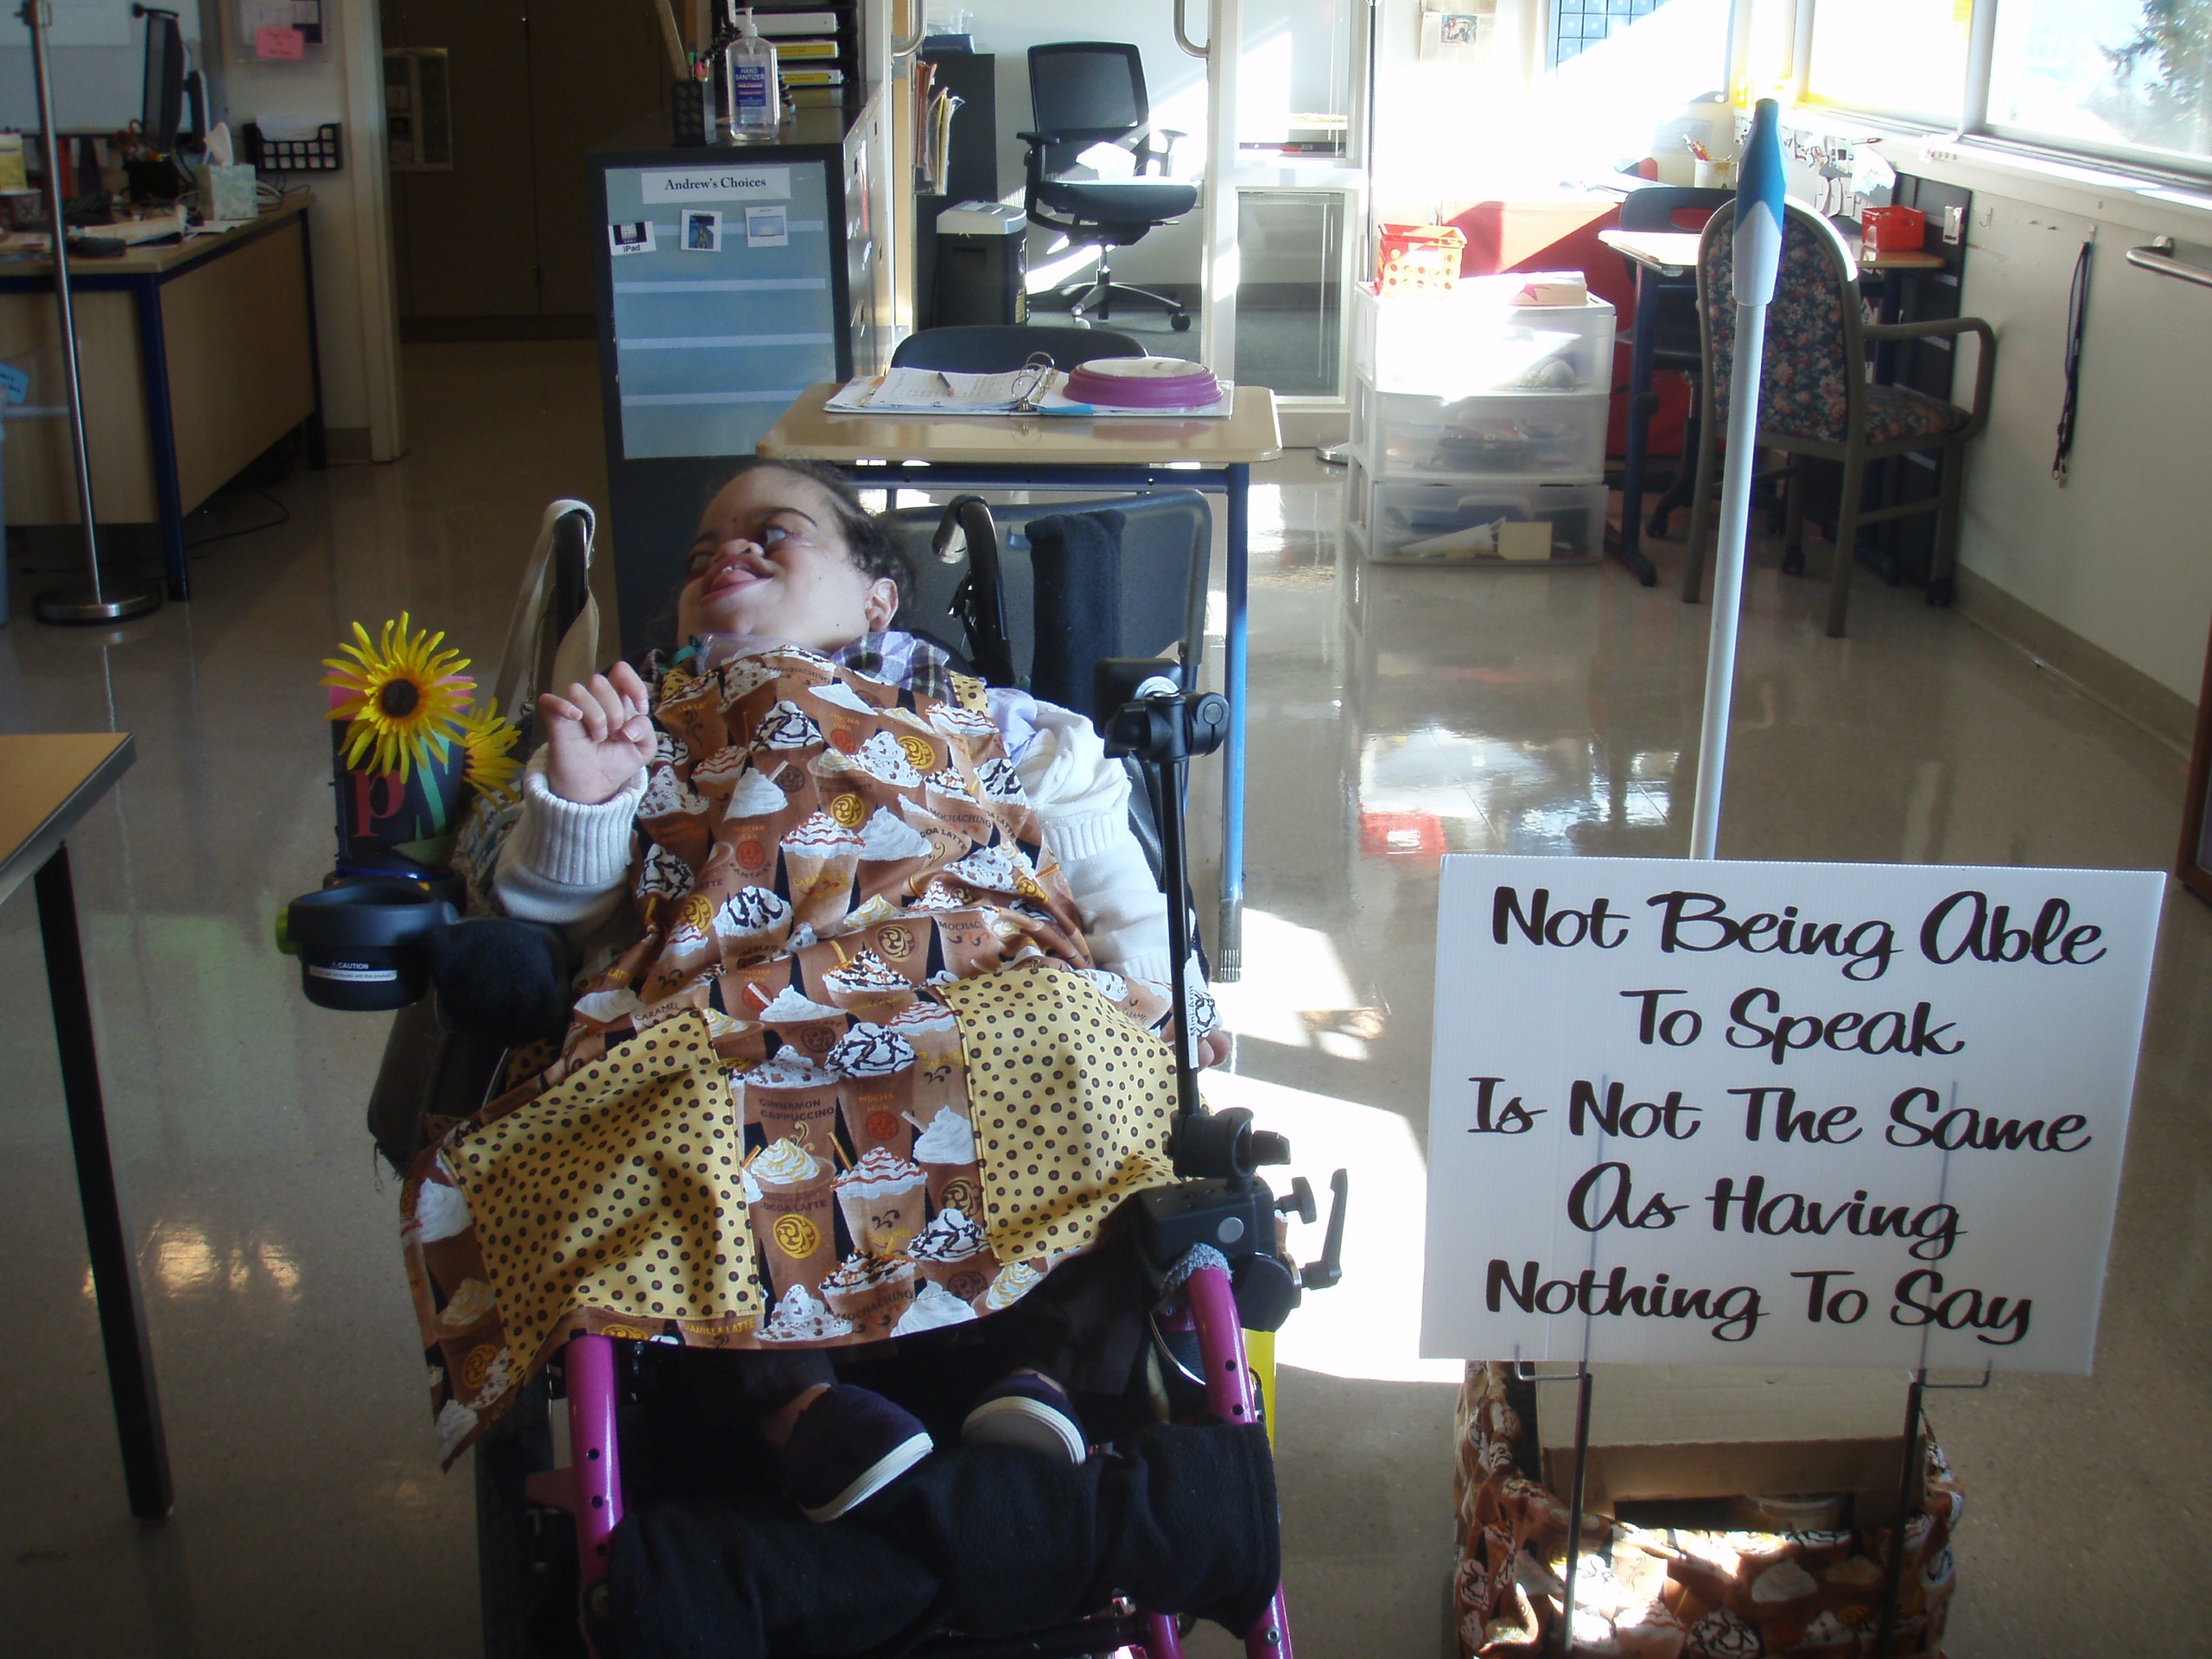 Miranda in her wheeler chair with poster that says, "Not being able to speak is not the same as having nothing to say".